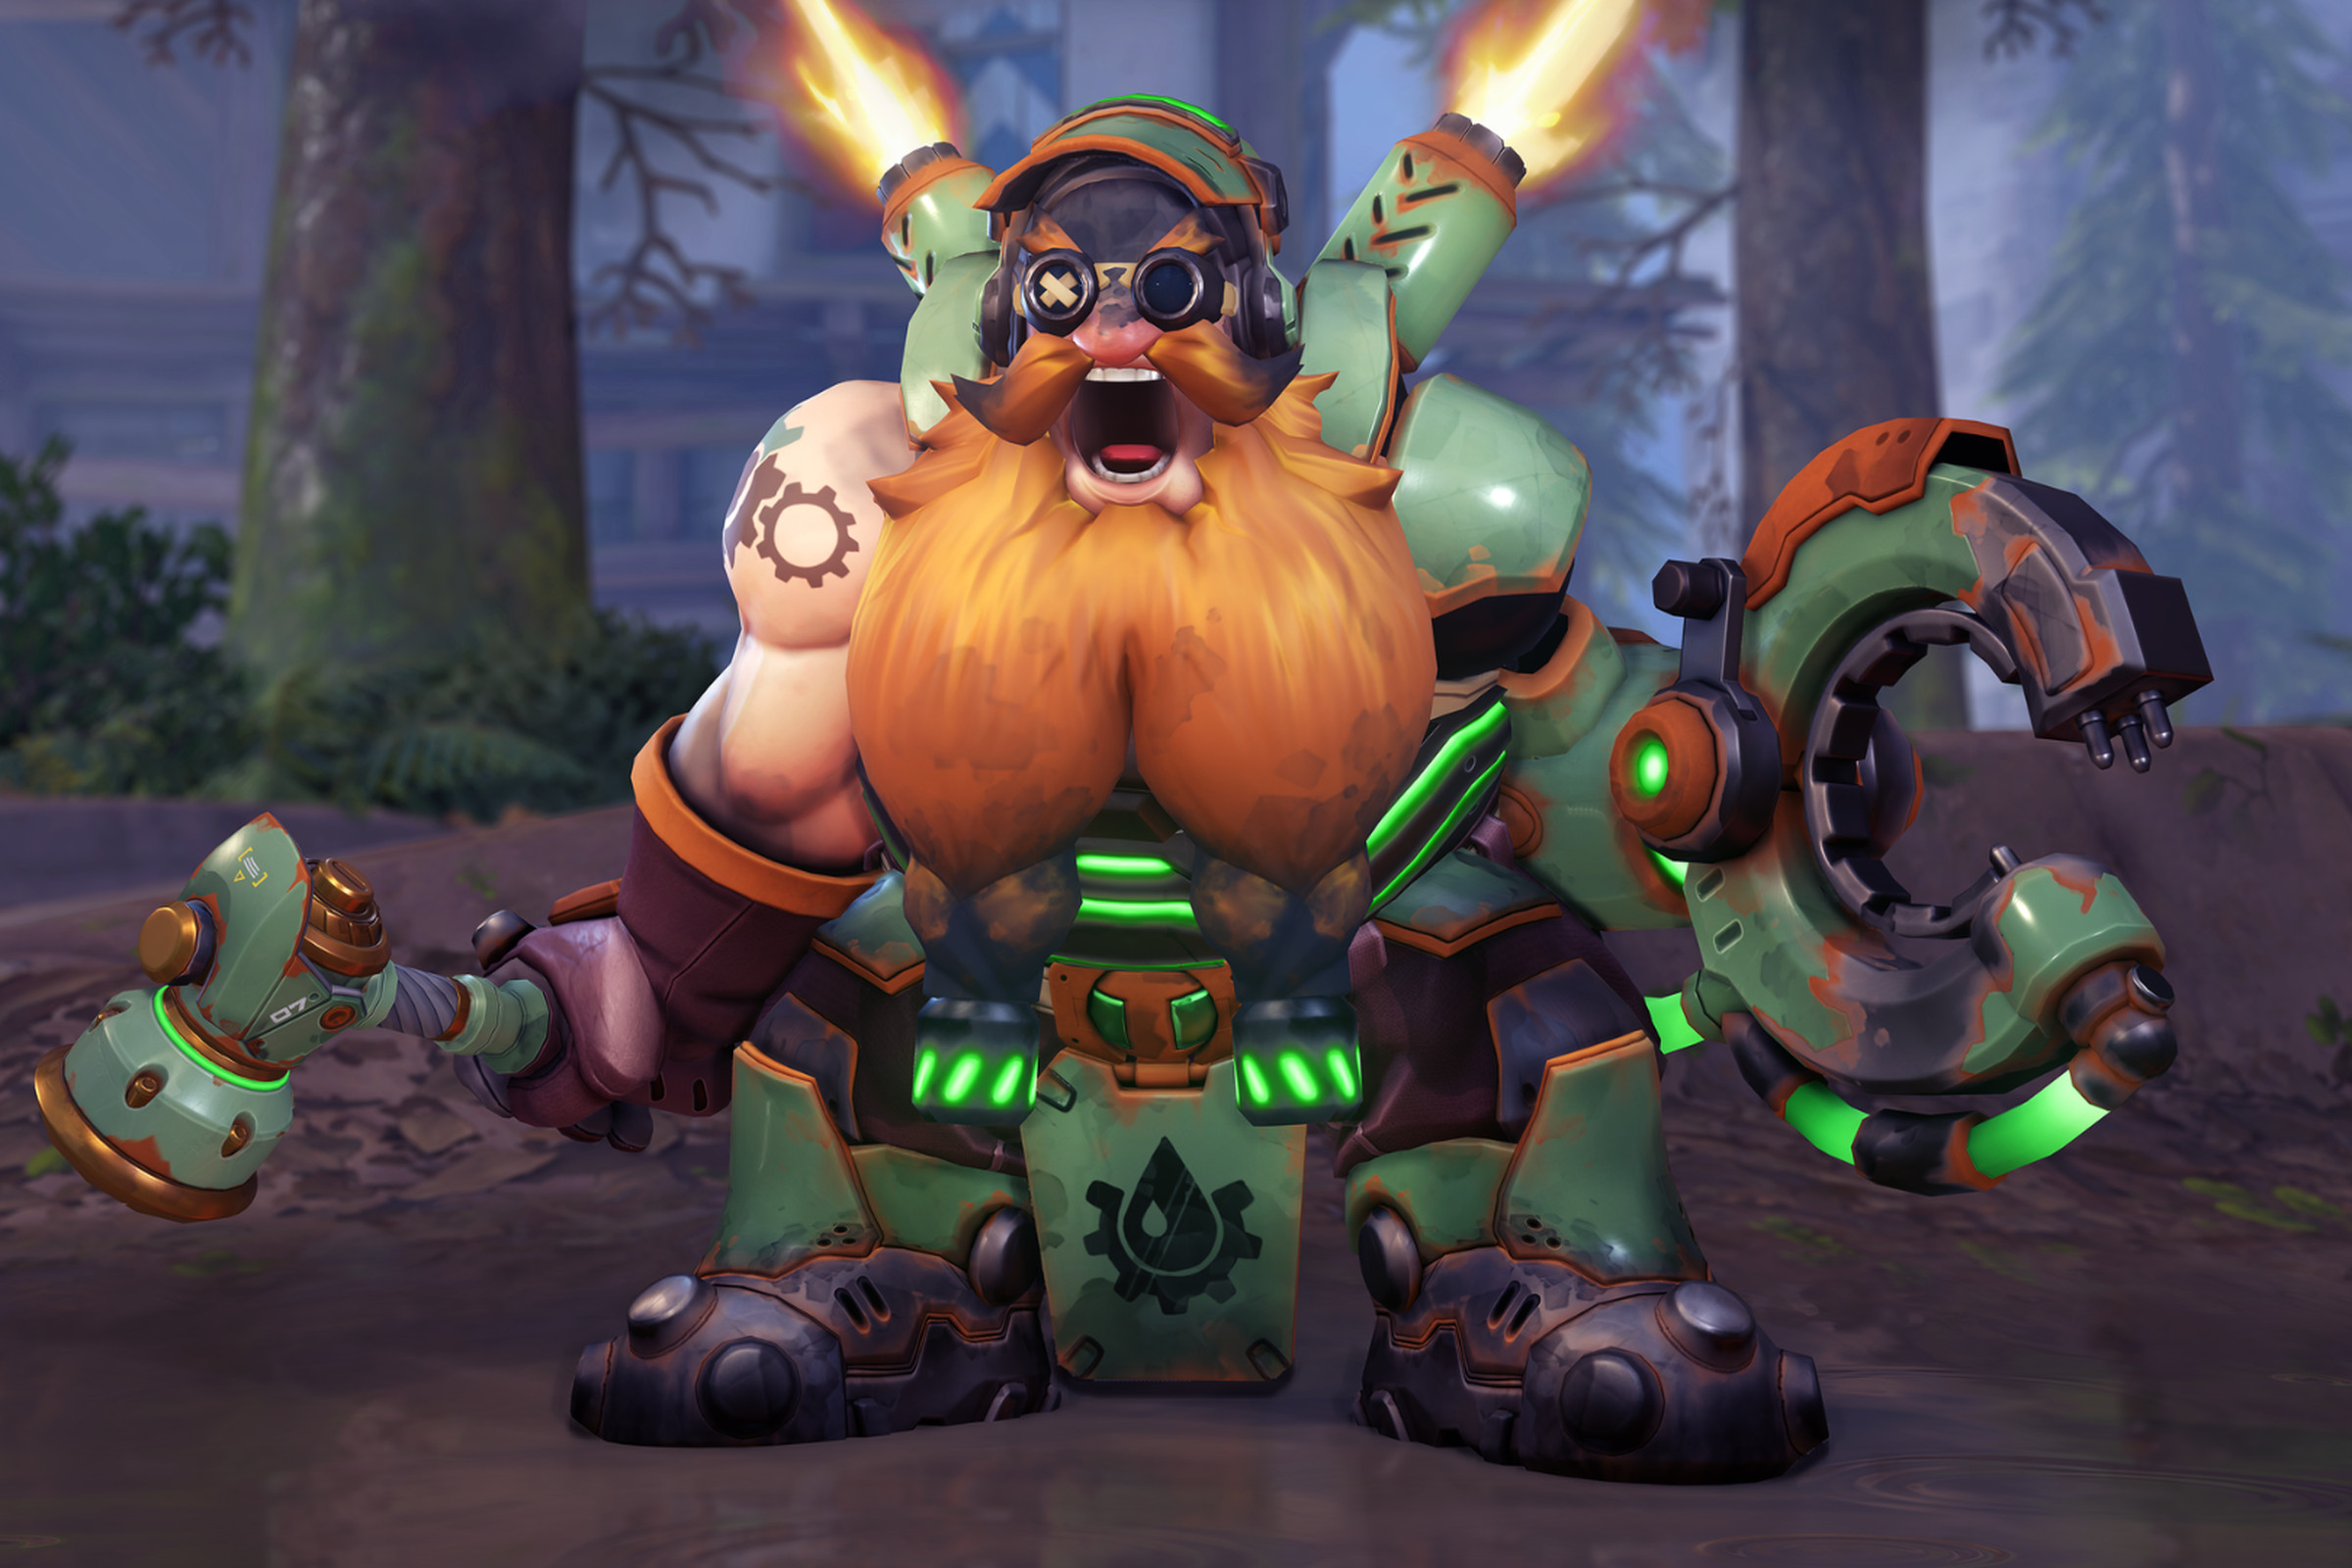 Screenshot from Overwatch 2 featuring the short hero Torbjorn with a red beard and a green two-pronged claw for a left hand.